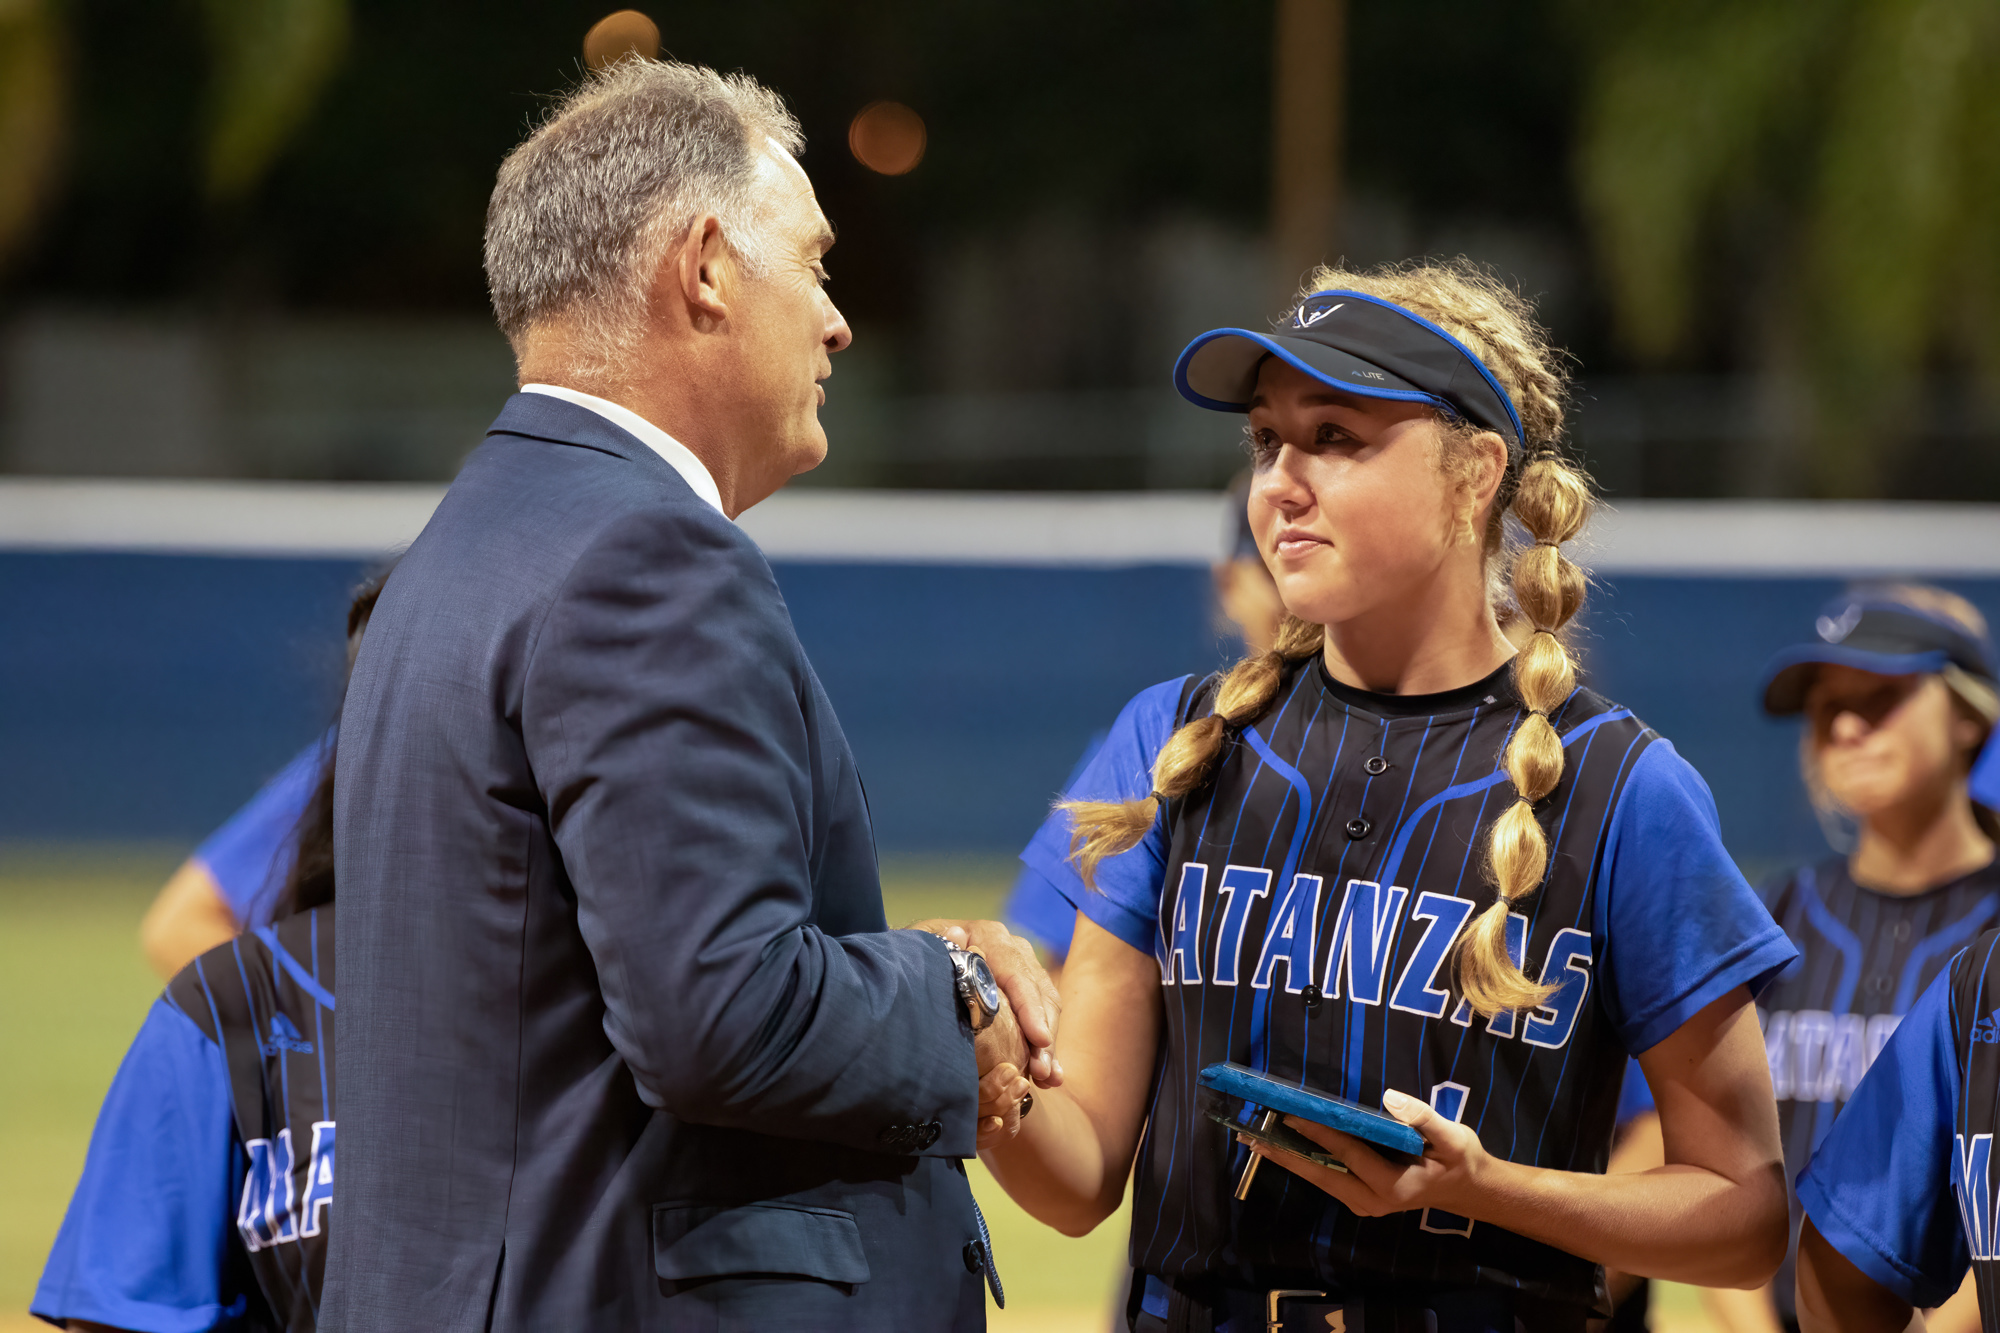 Principal Jeff Reaves presents Emma Wood with Matanzas' female athlete of the year award at the regional softball quarterfinal on May 11 at Daytona State College. File photo by Jake Montgomery